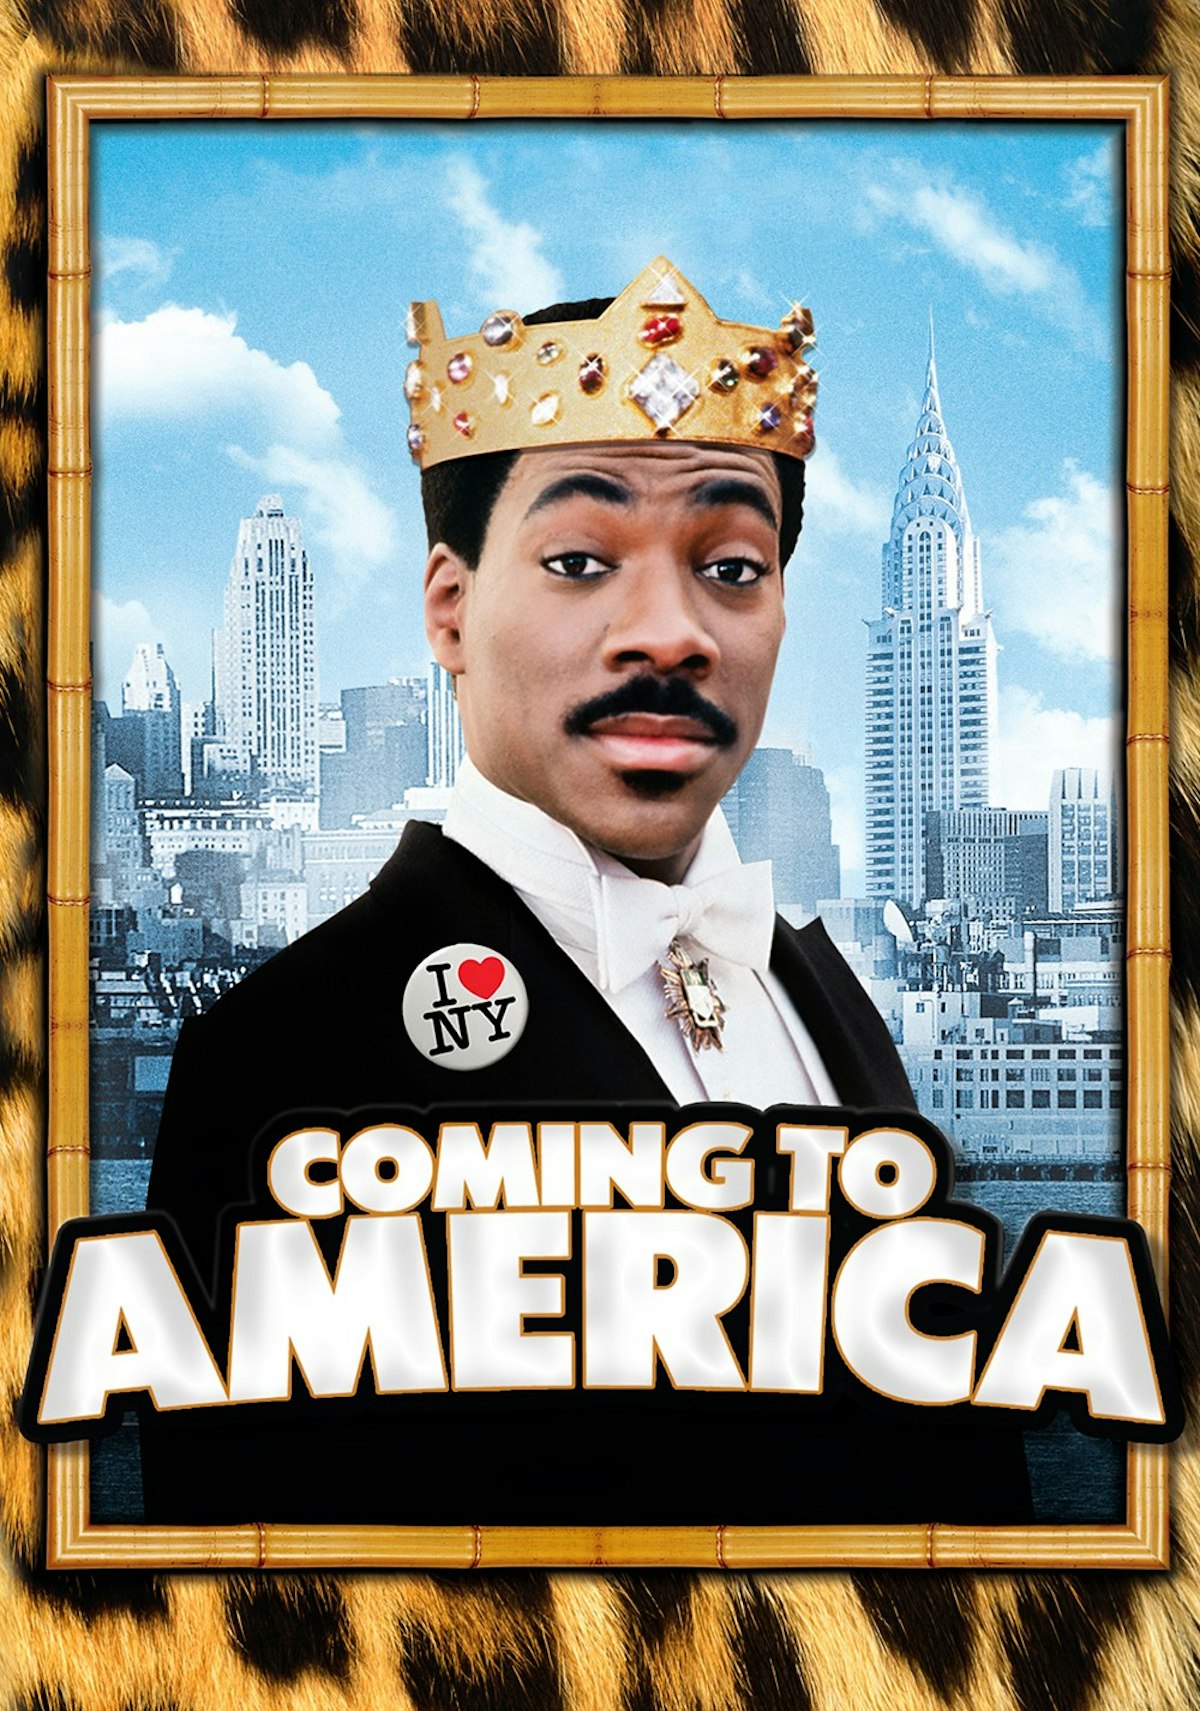 featured image - Coming to America: An Immigrant’s Perspective